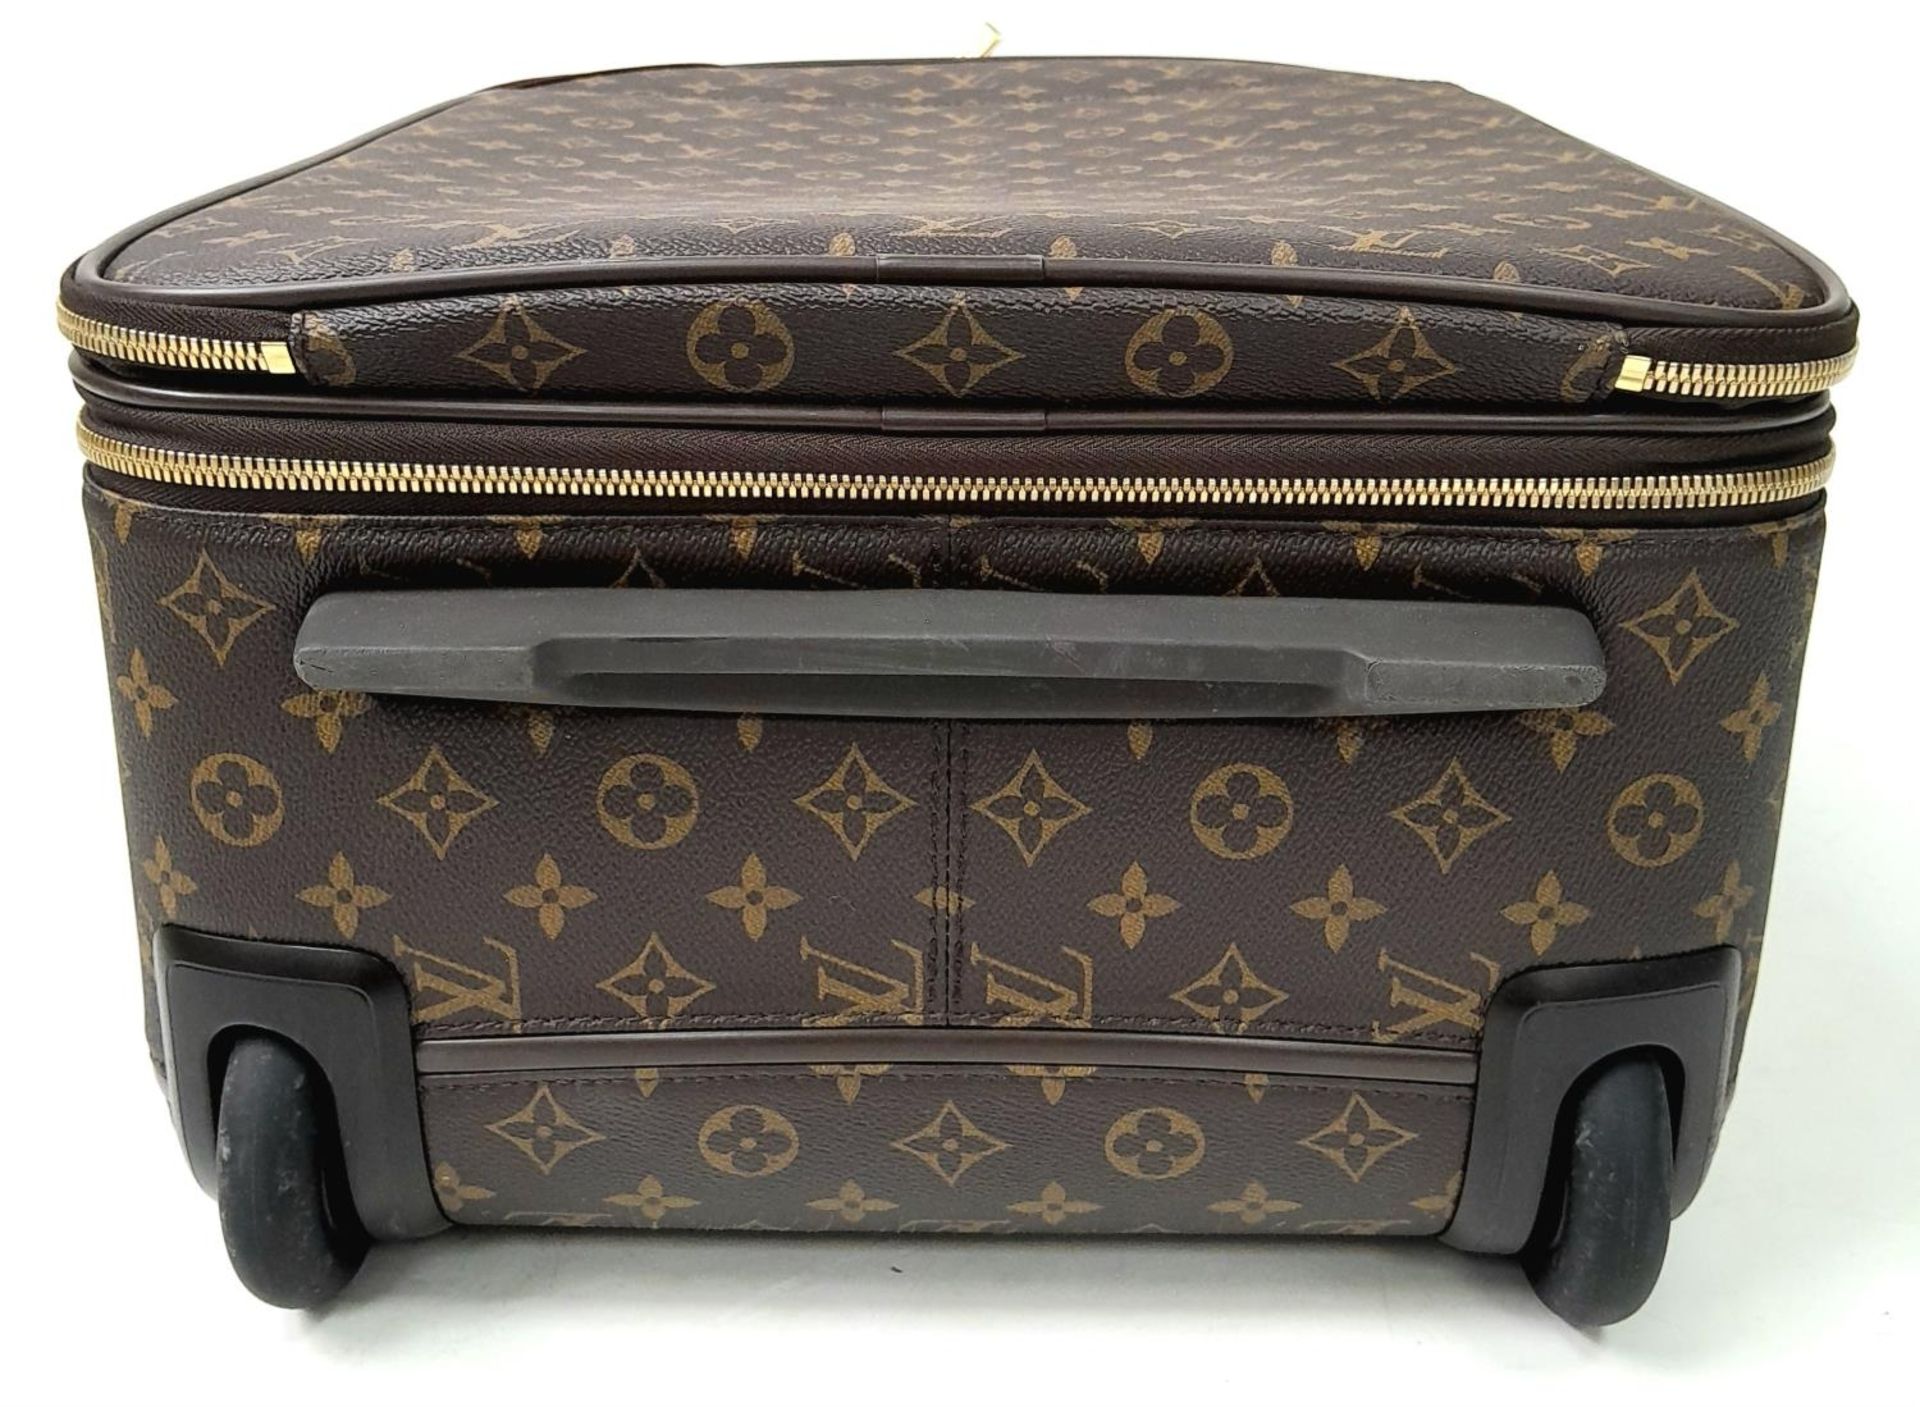 A Louis Vuitton Monogram Pegase Suitcase. Durable leather exterior with gold-toned hardware. Front - Image 5 of 16